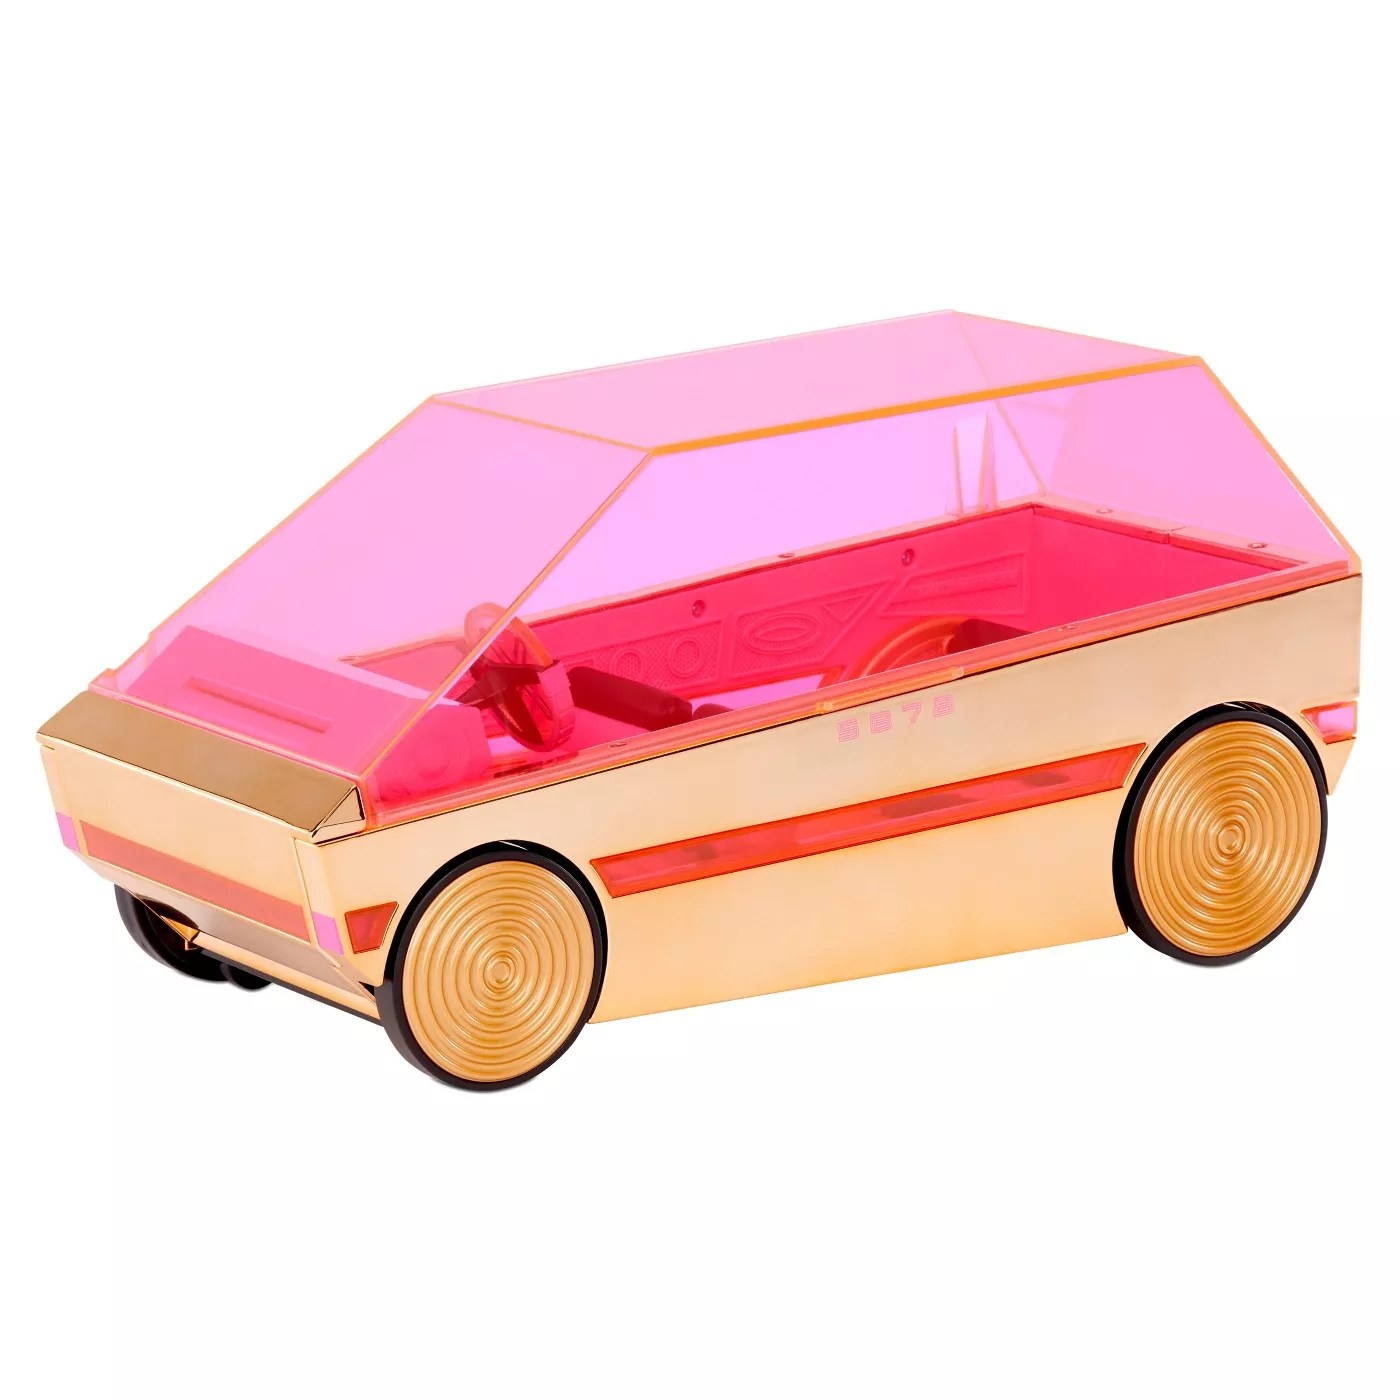 The pink and orange party cruiser